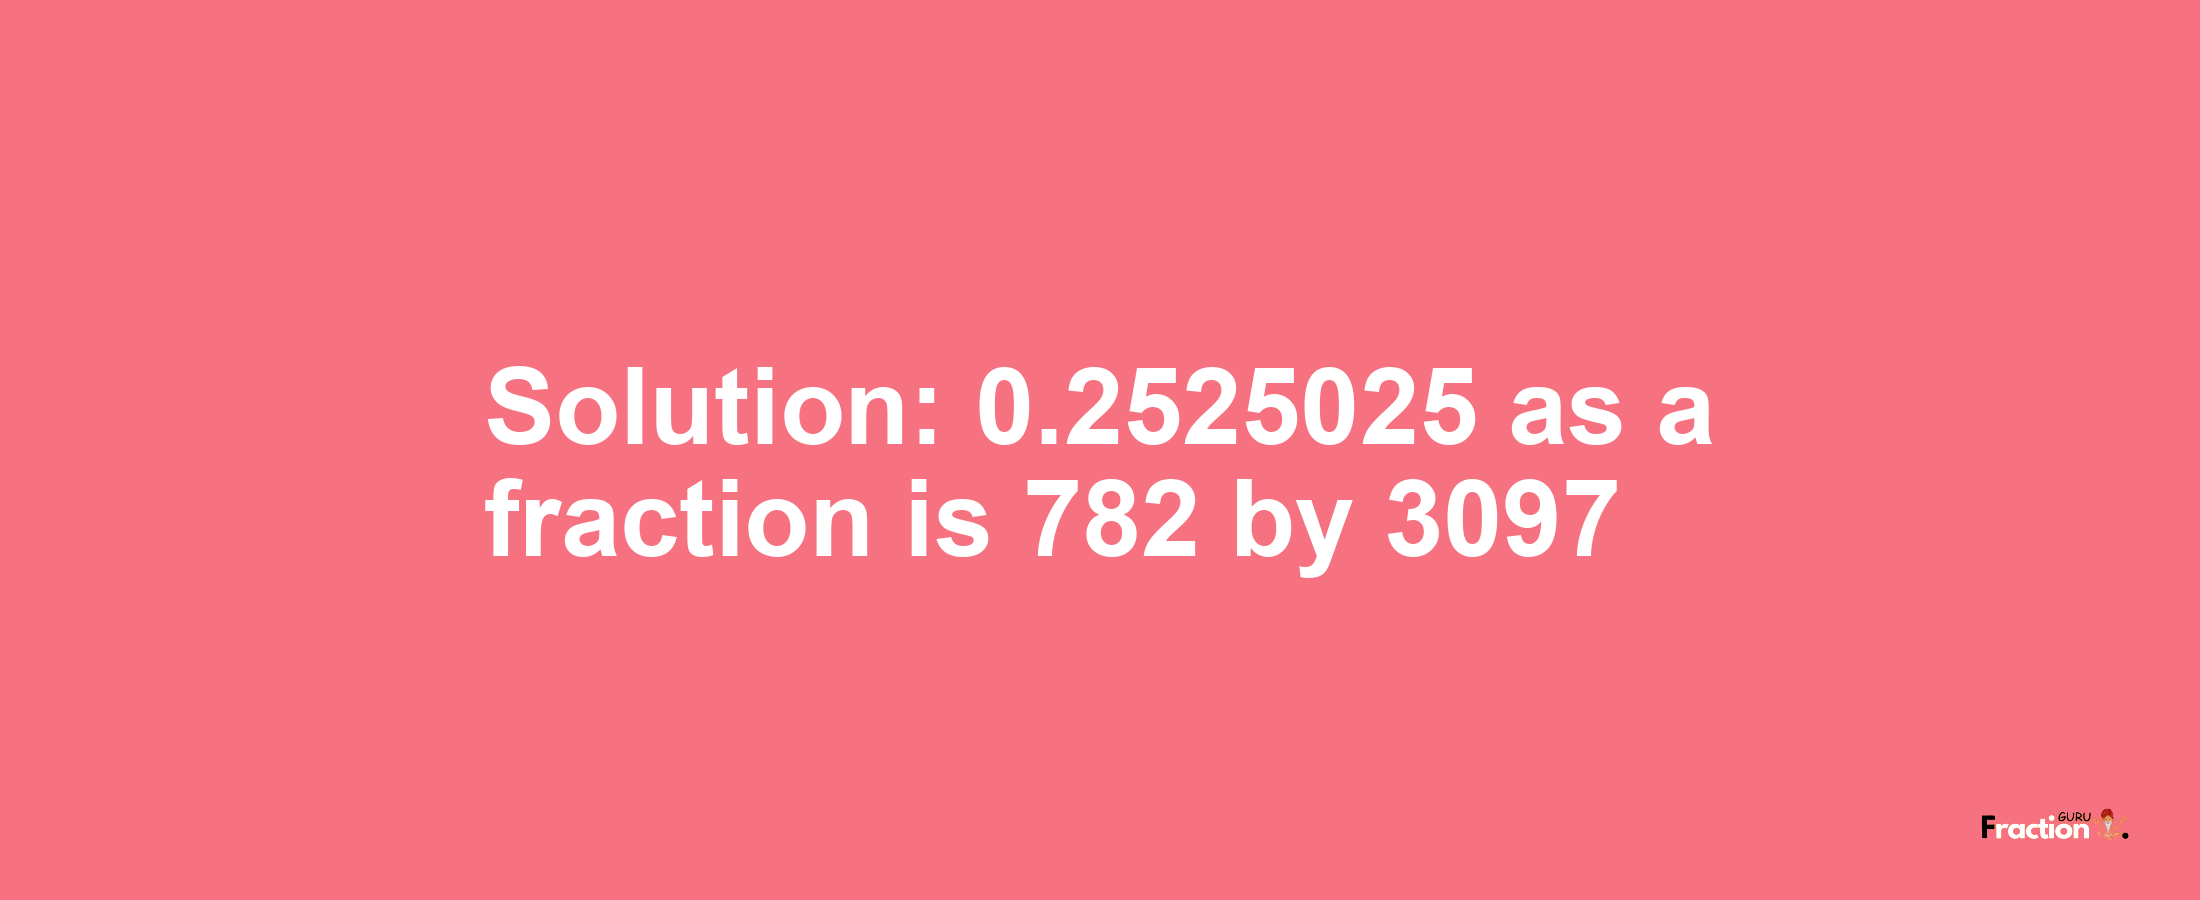 Solution:0.2525025 as a fraction is 782/3097